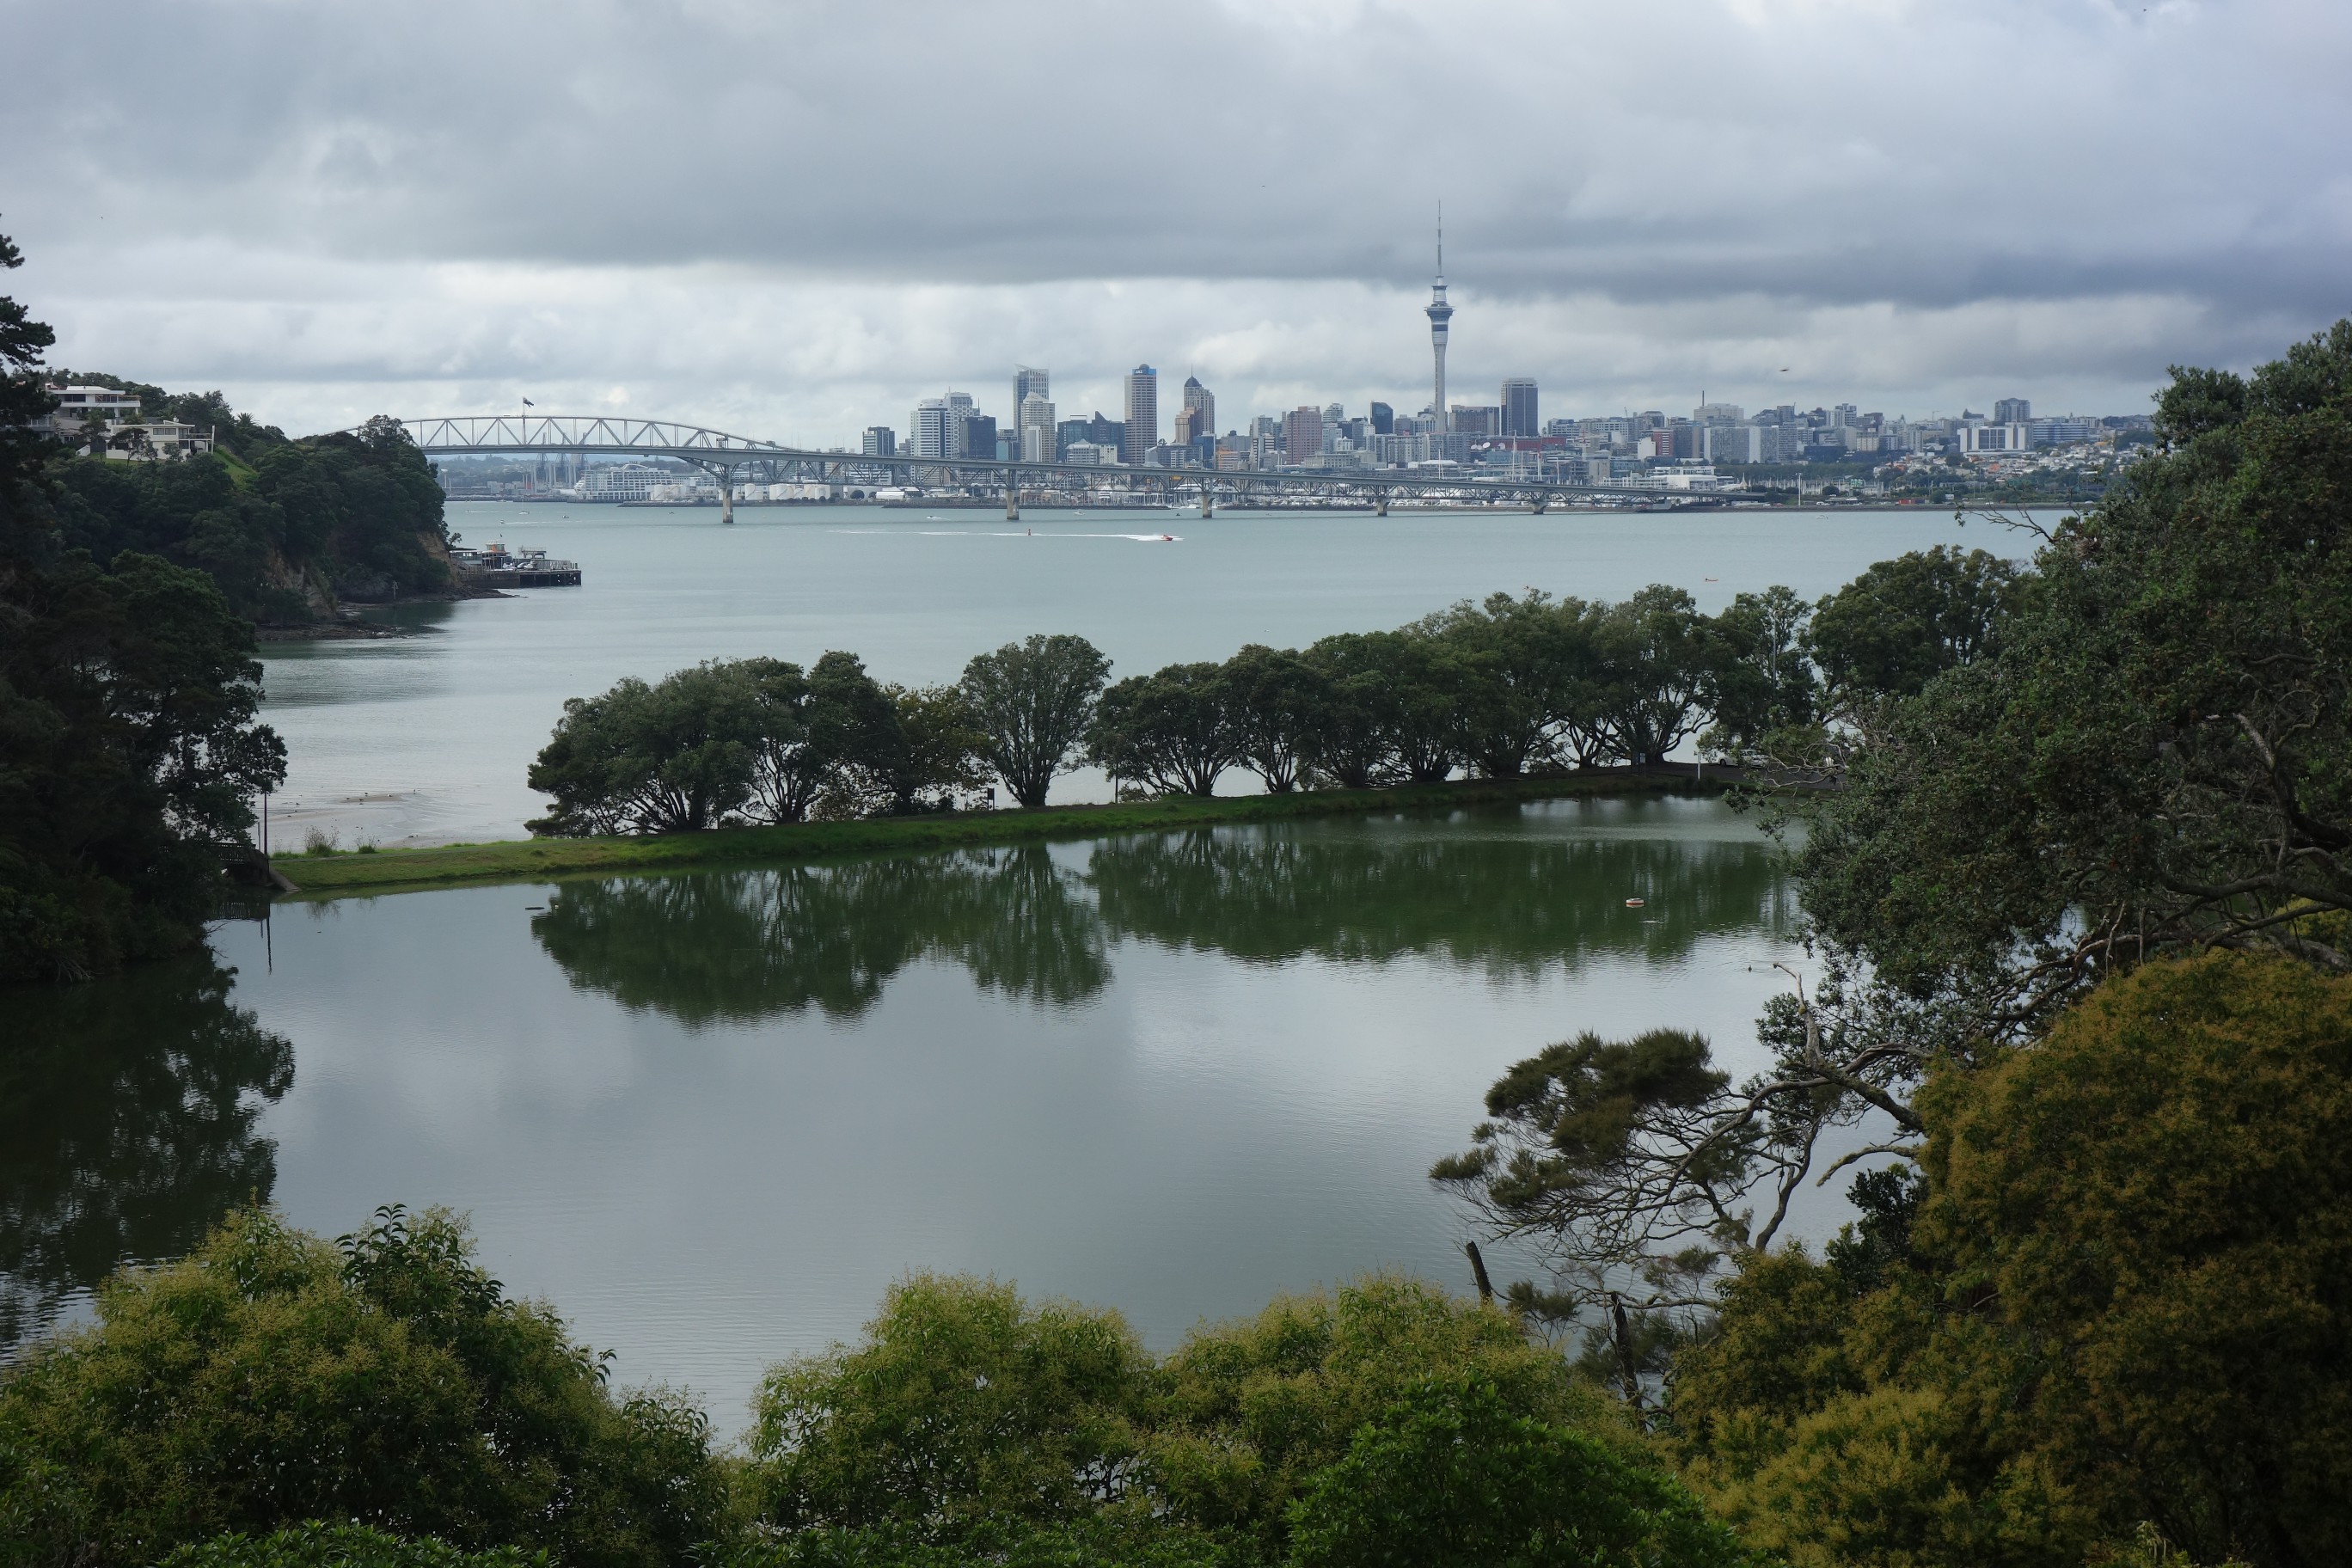 Auckland tramping – Outside the Waitakere’s